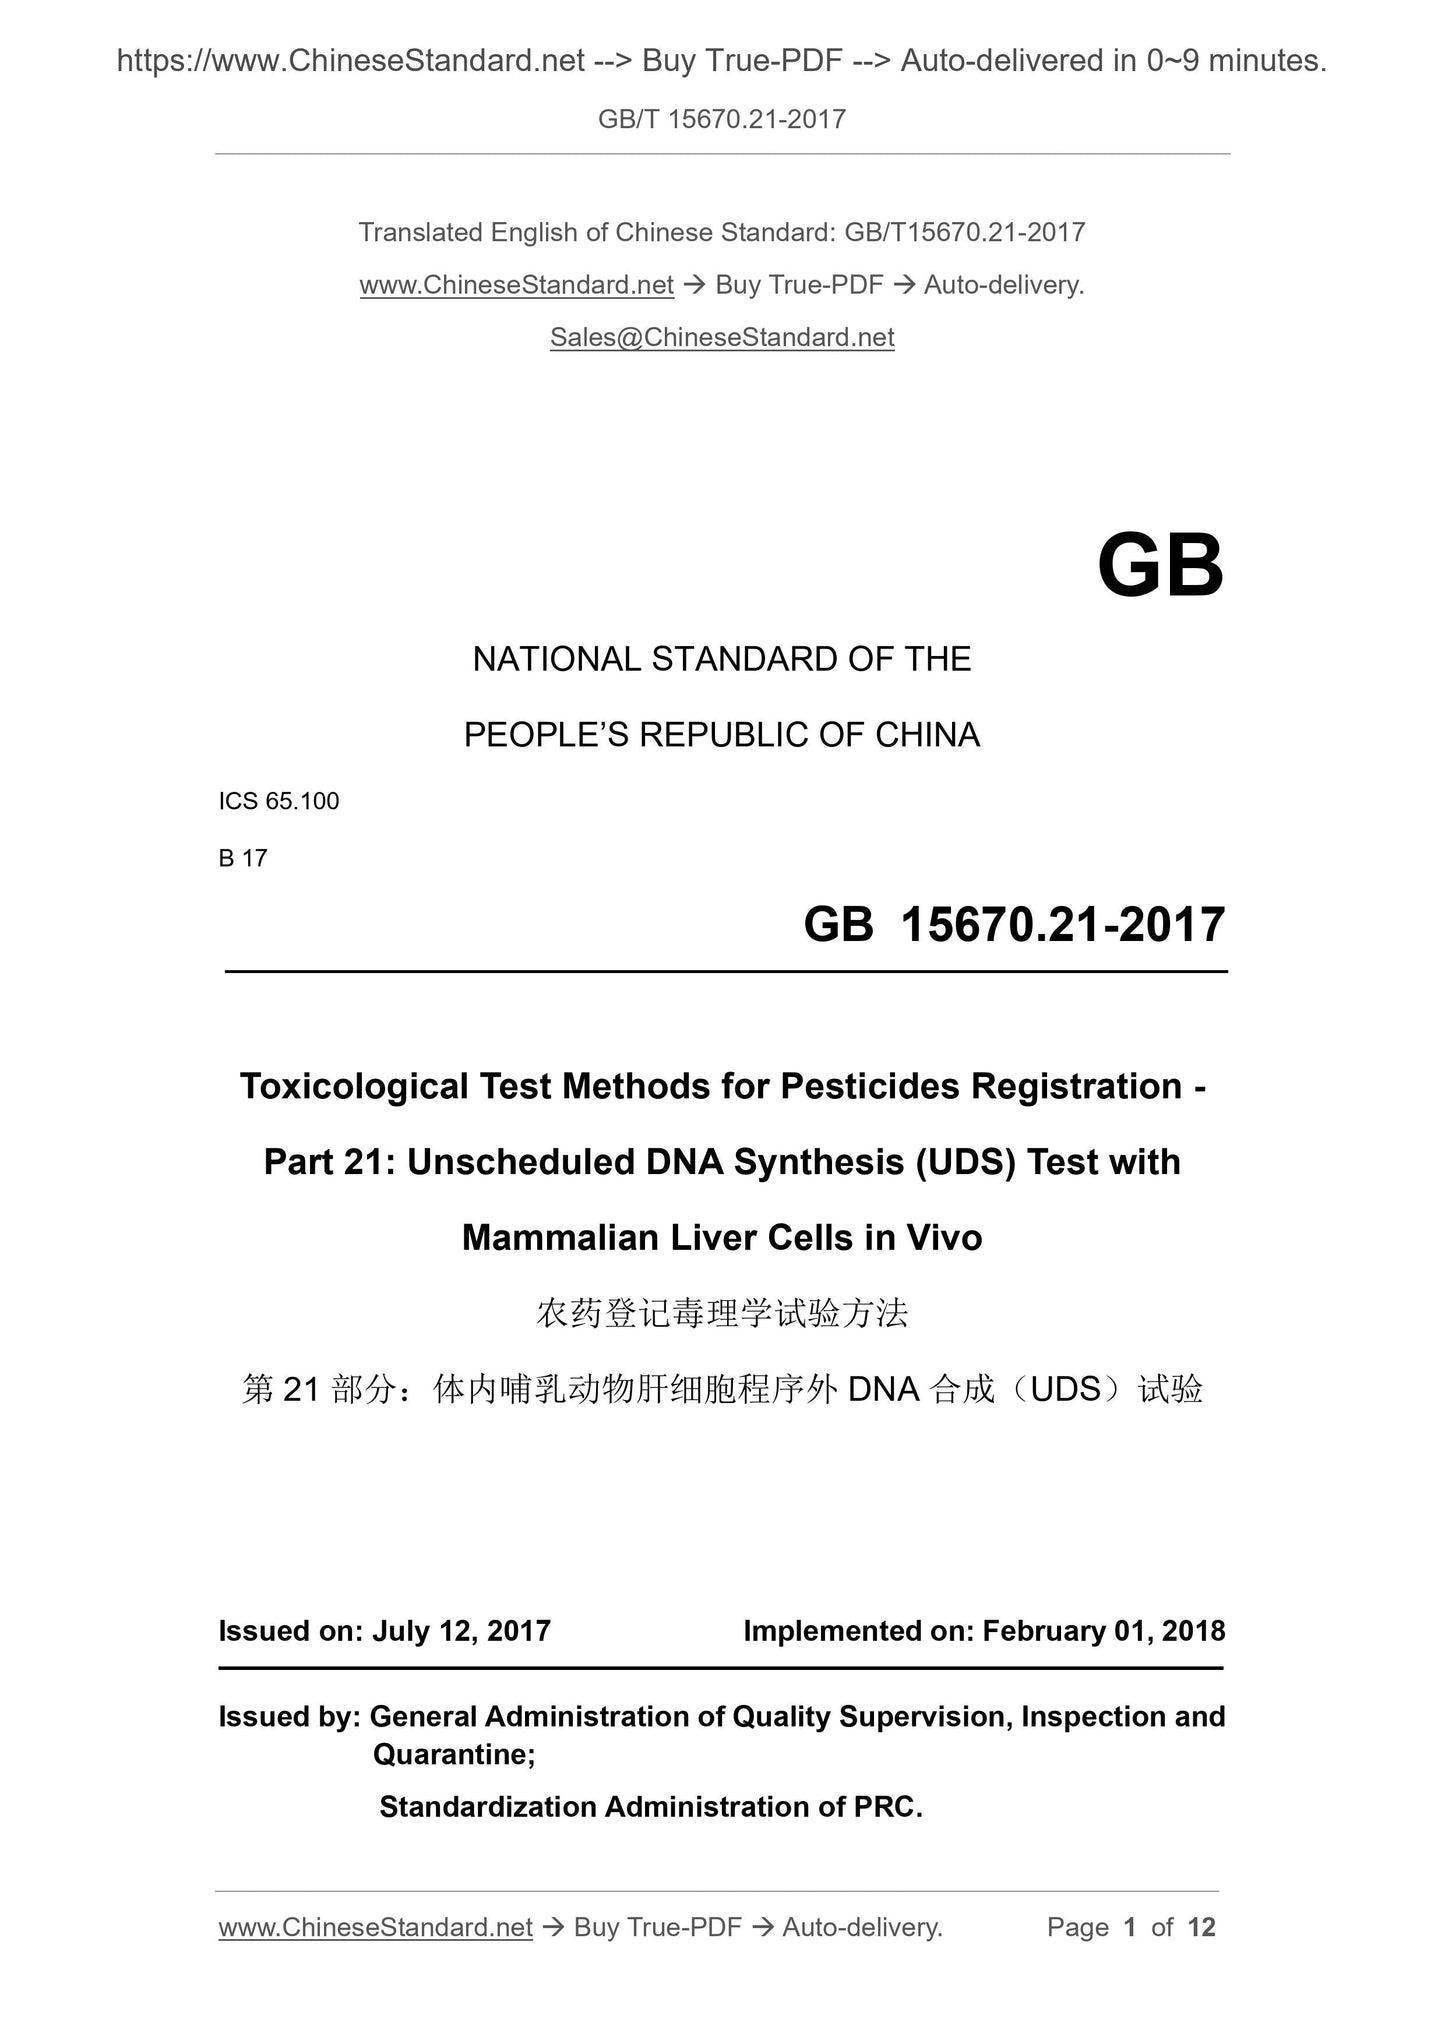 GB/T 15670.21-2017 Page 1